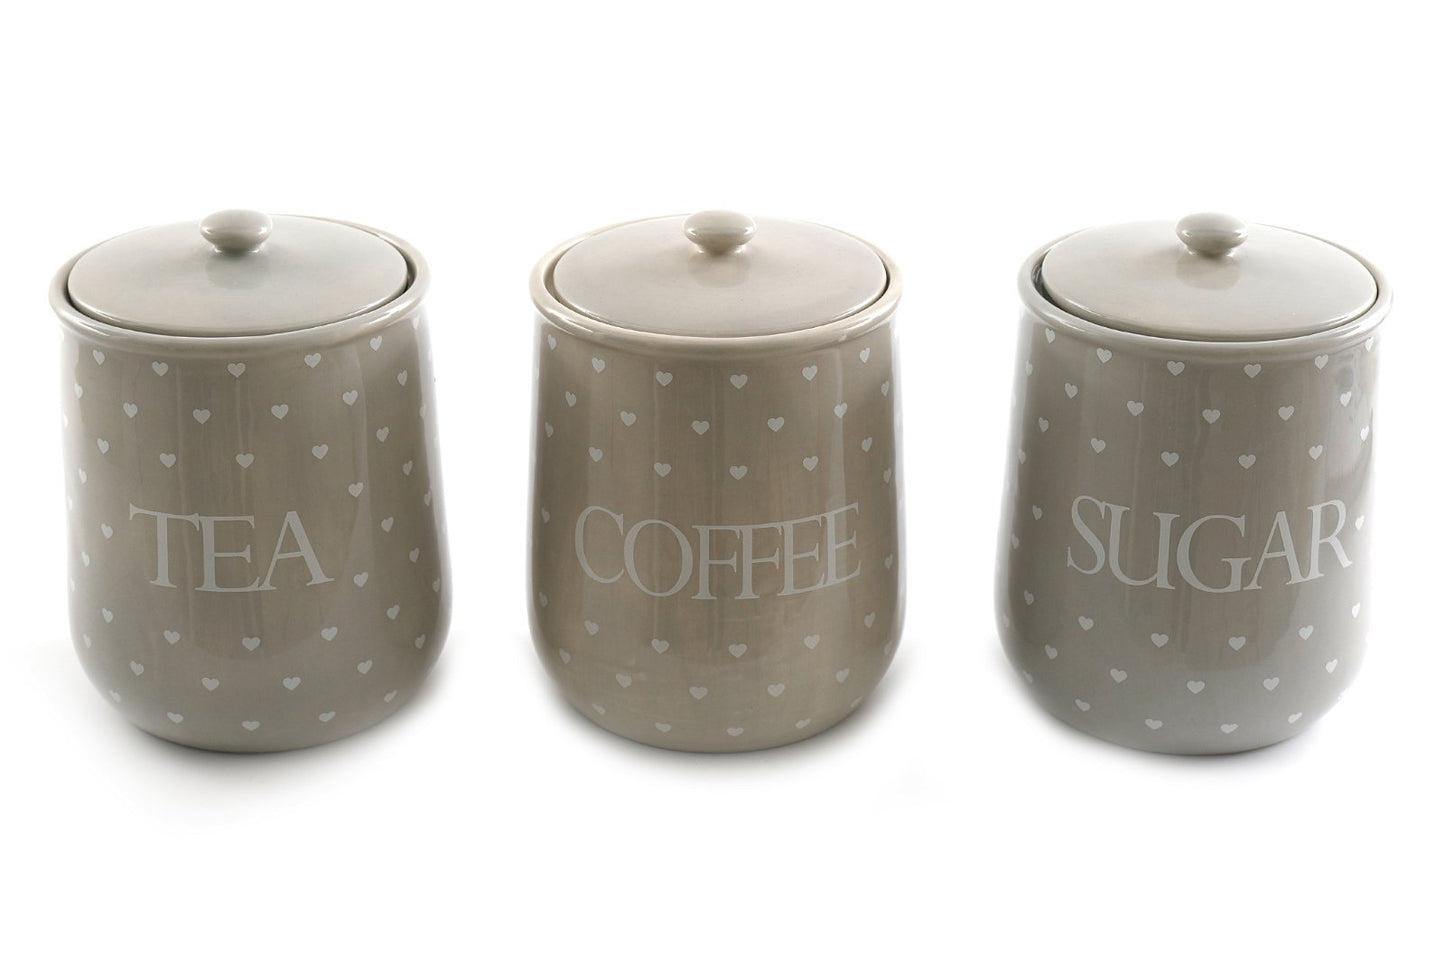 Heart Design Tea, Coffee and Sugar Canisters